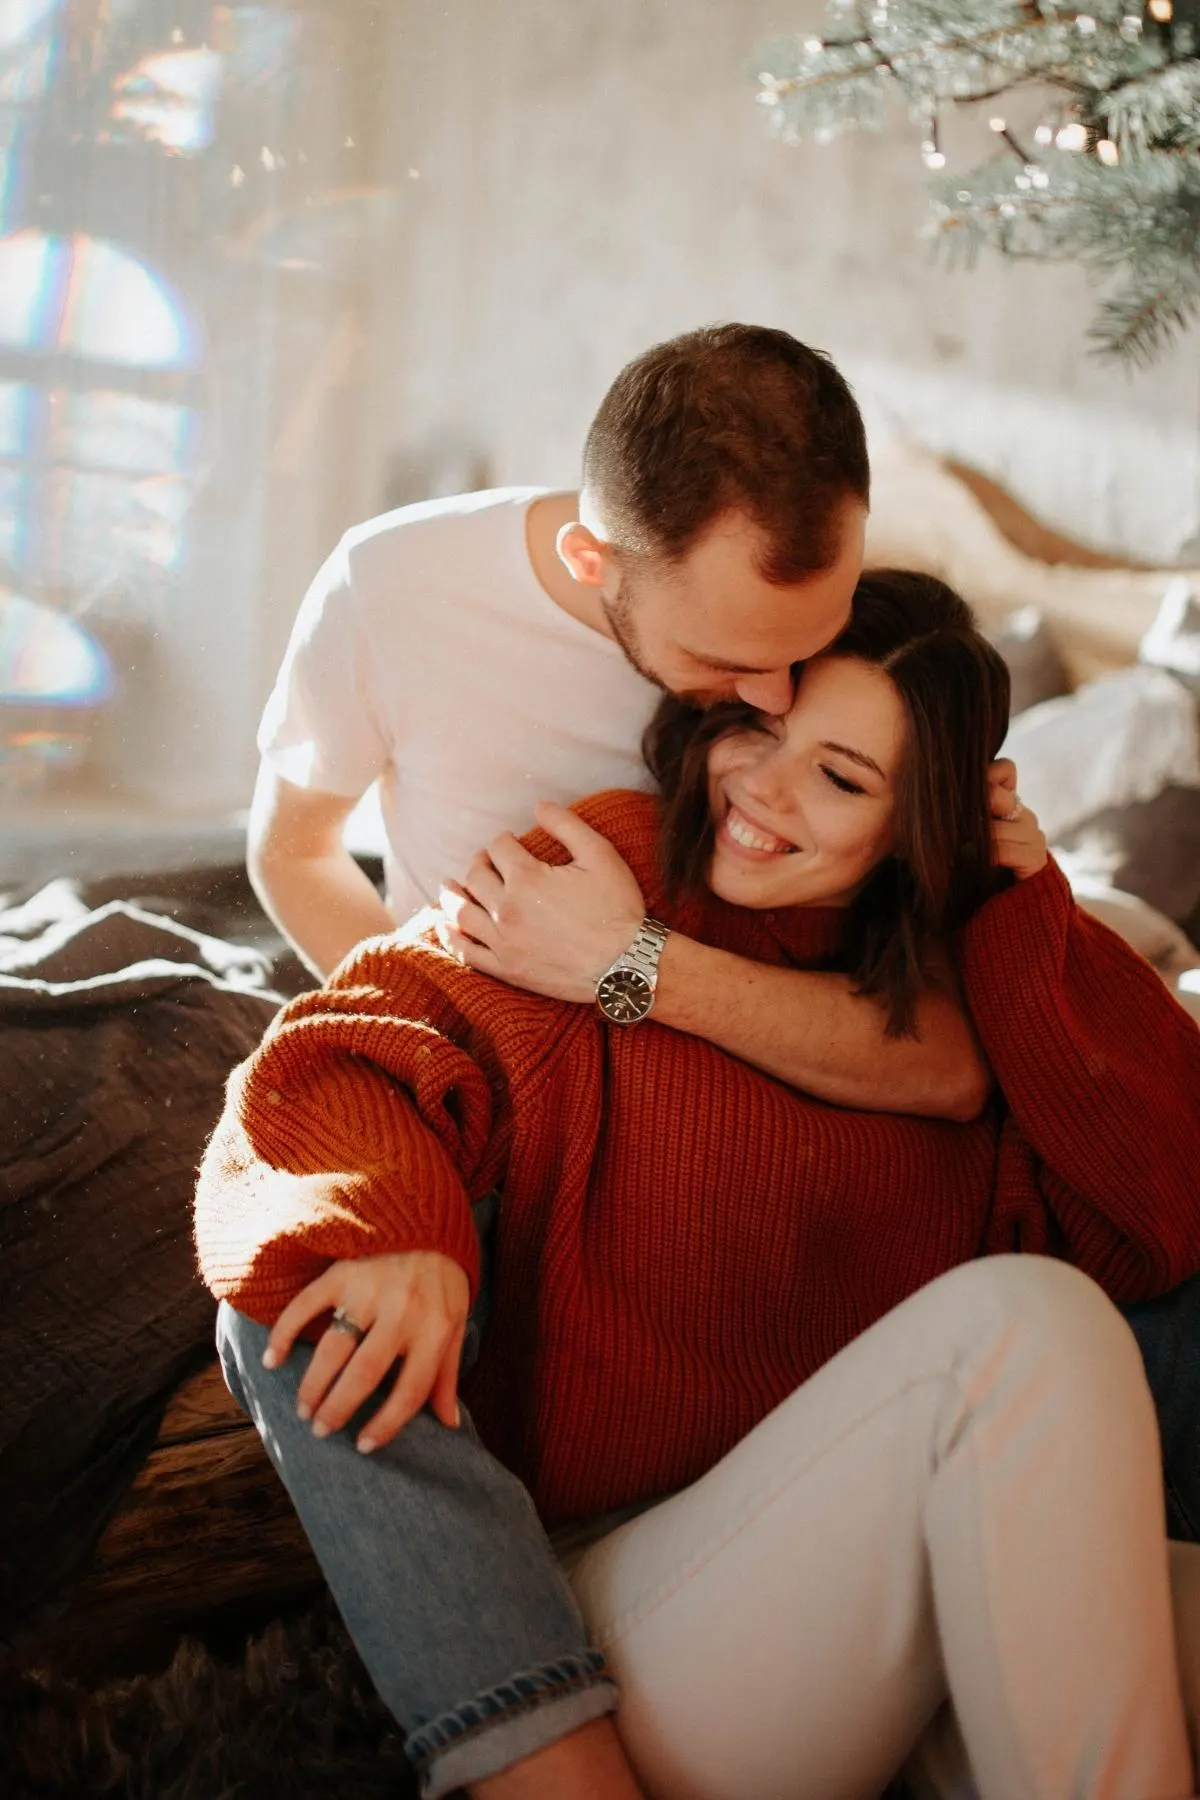 Strengthen your marriage by understanding the Five Love Languages. This powerful tool, explored in our in-depth guide, can help you and your spouse communicate more effectively and love more deeply.